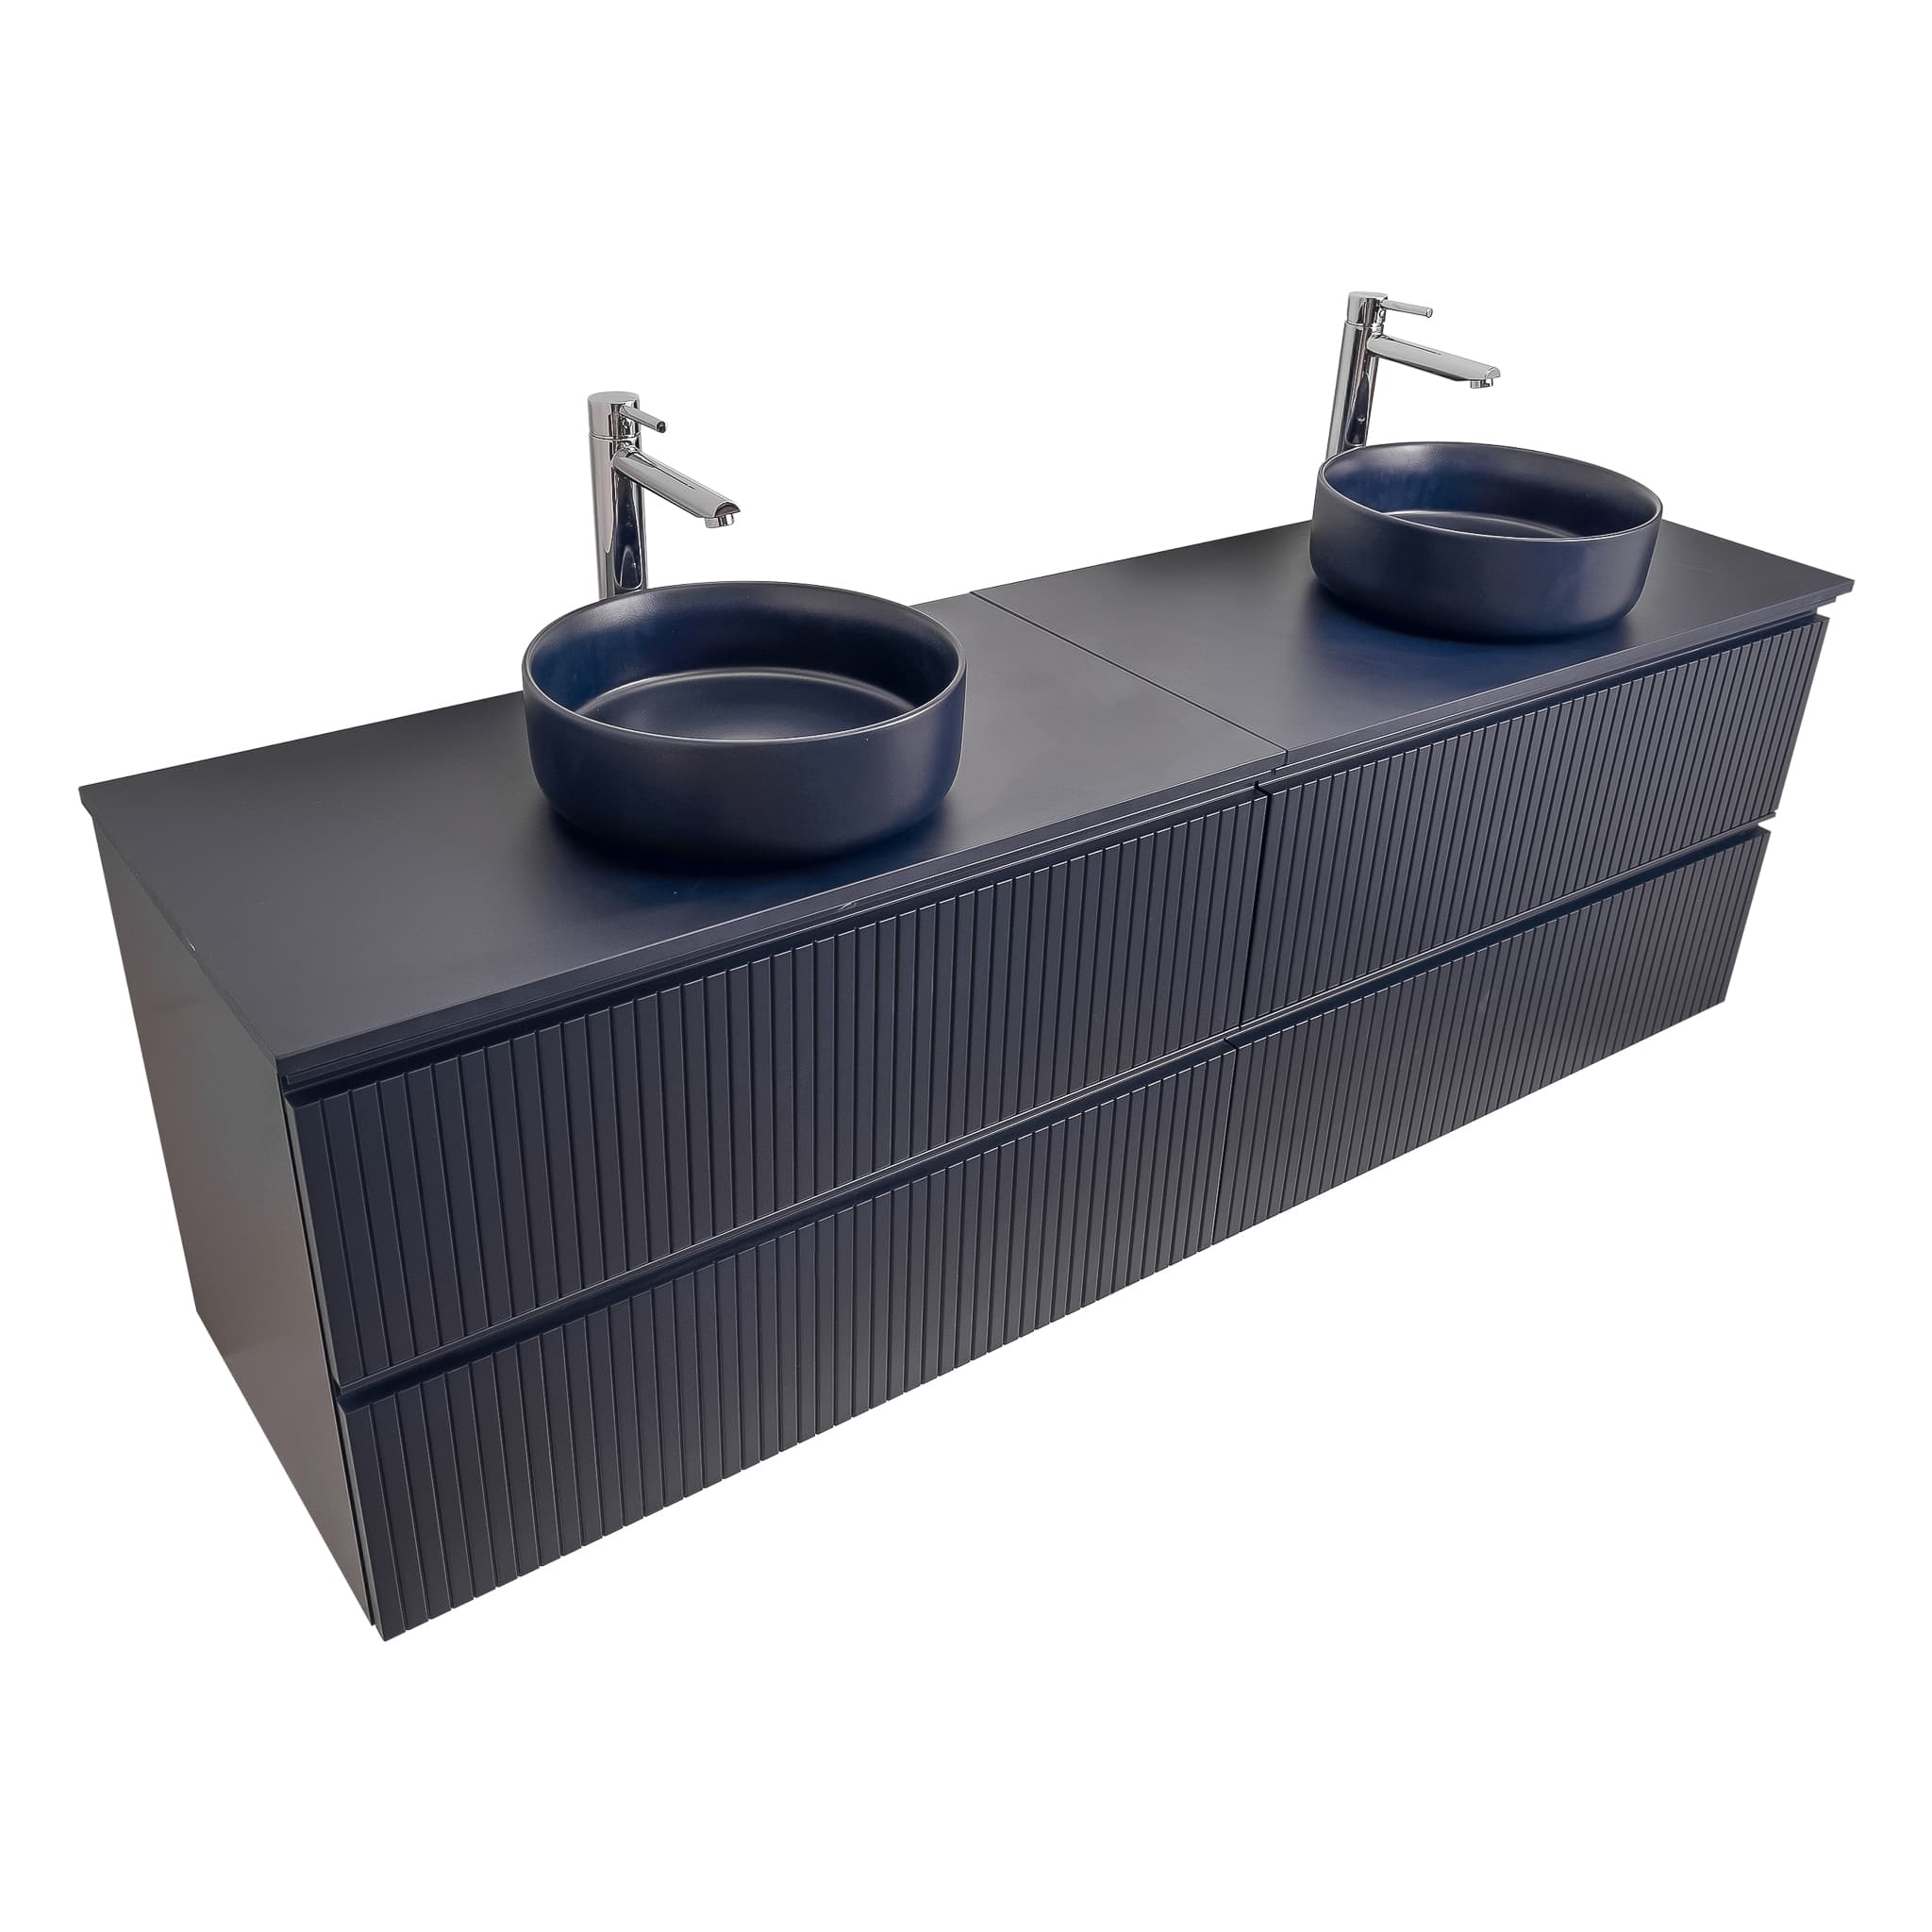 Ares 72 Matte Navy Blue Cabinet, Ares Navy Blue Top And Two Ares Navy Blue Ceramic Basin, Wall Mounted Modern Vanity Set